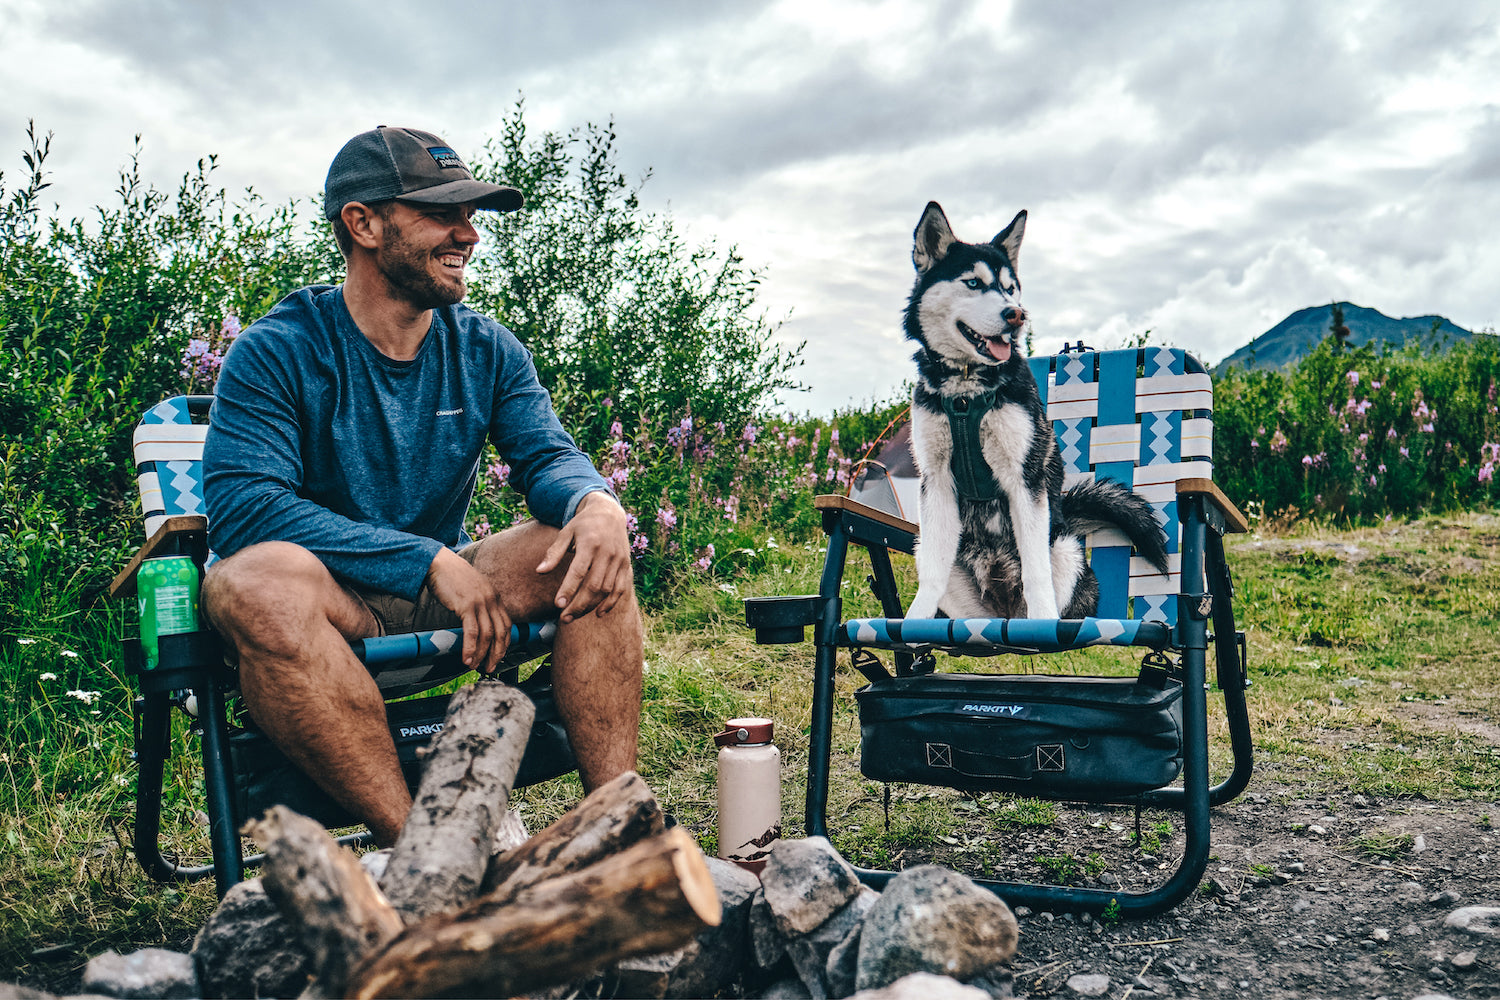 A man and his dog sit around a campfire in their Classic Blue Voyager outdoor chairs from PARKIT.